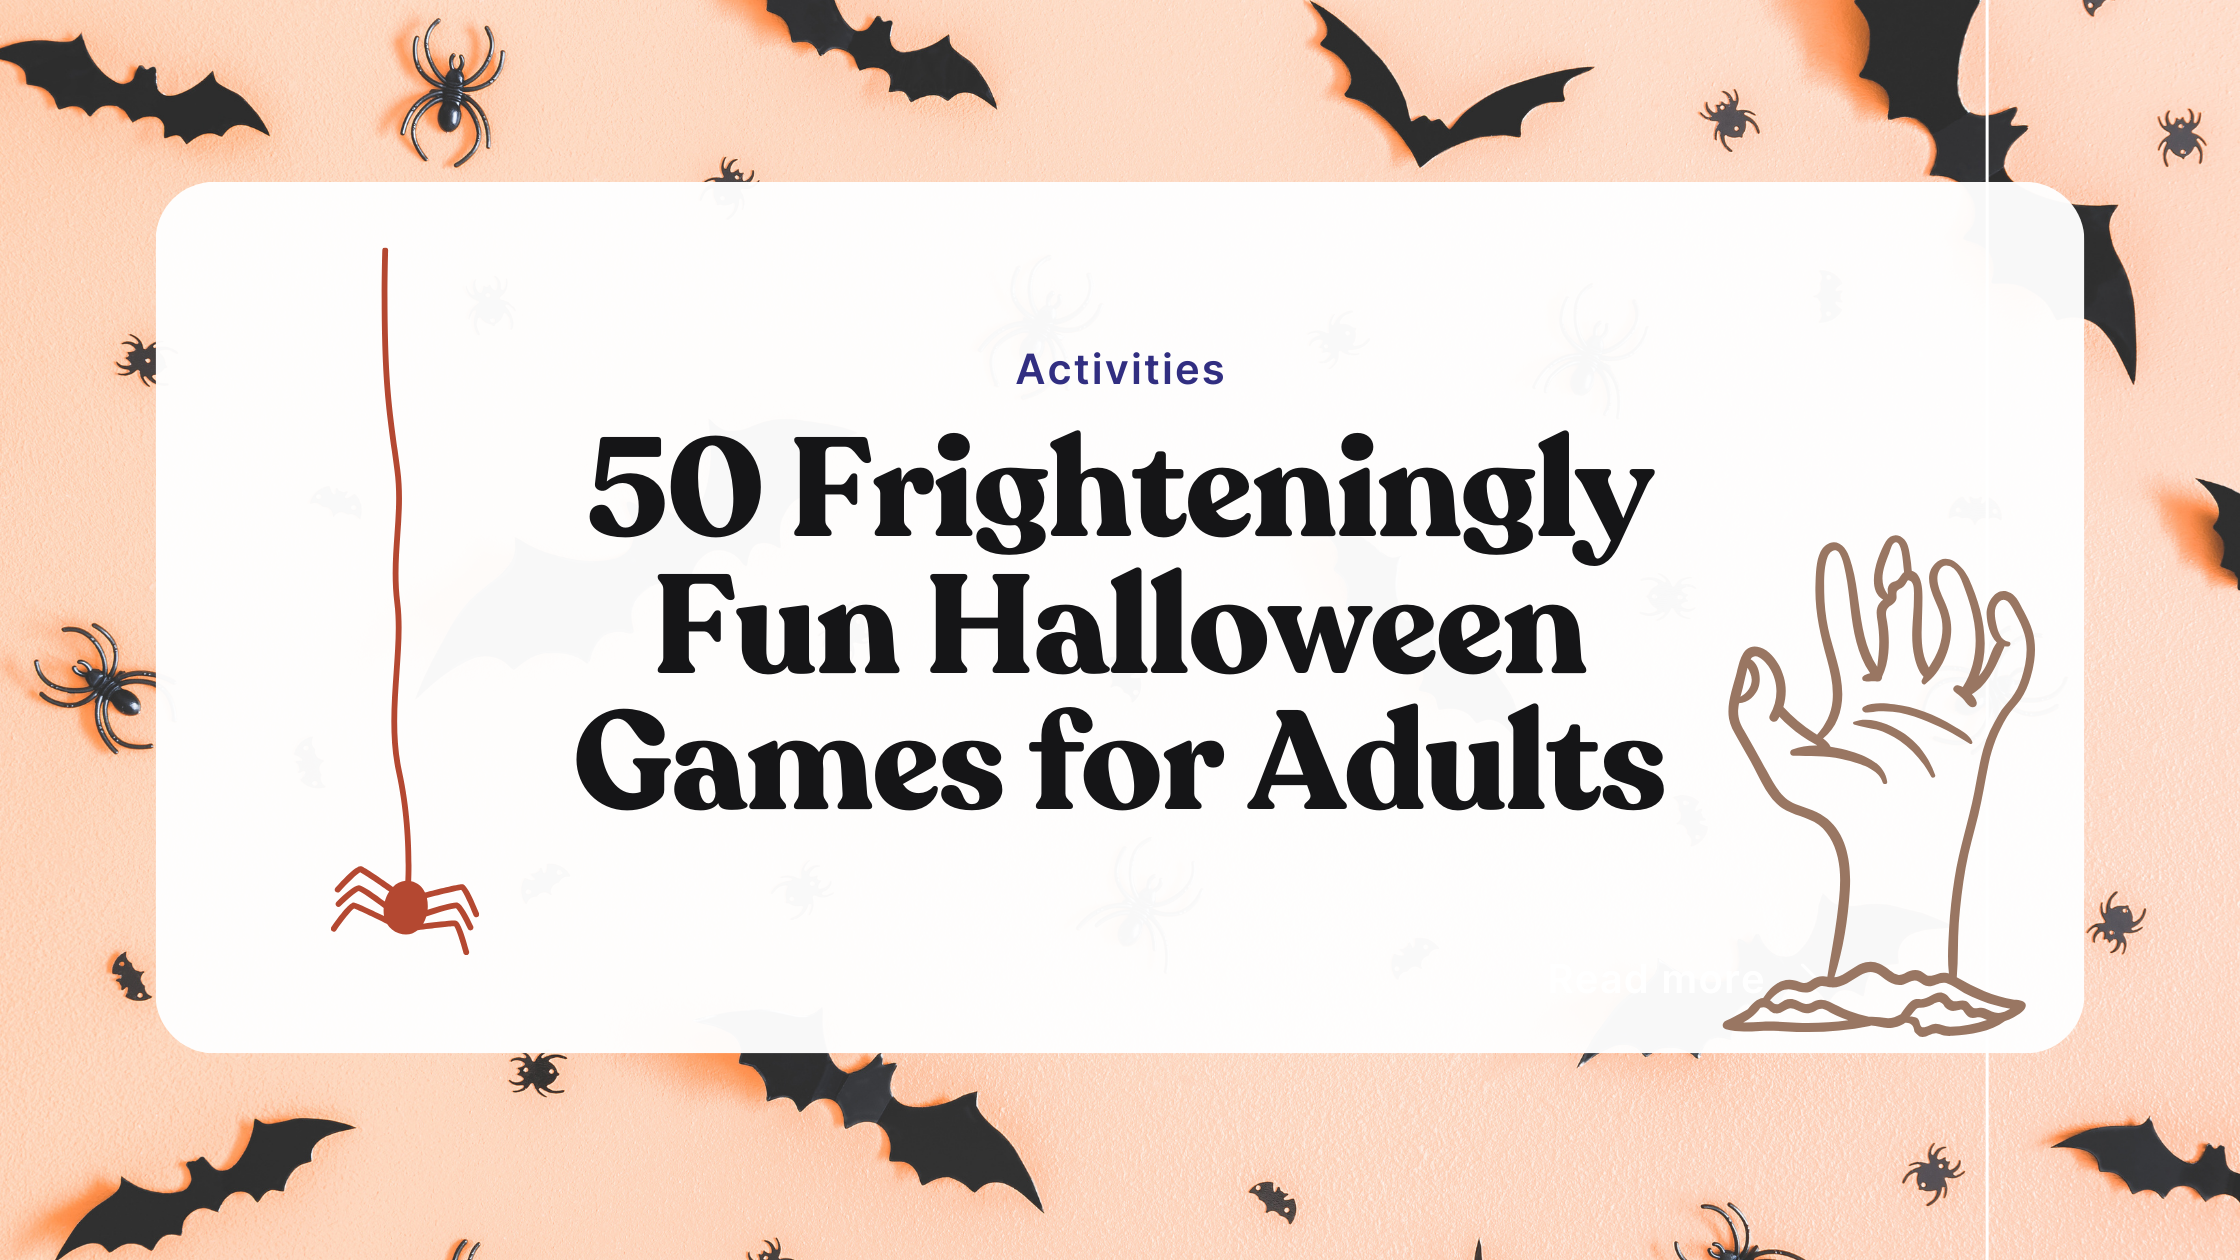 50 frighteningly fun Halloween games for adults